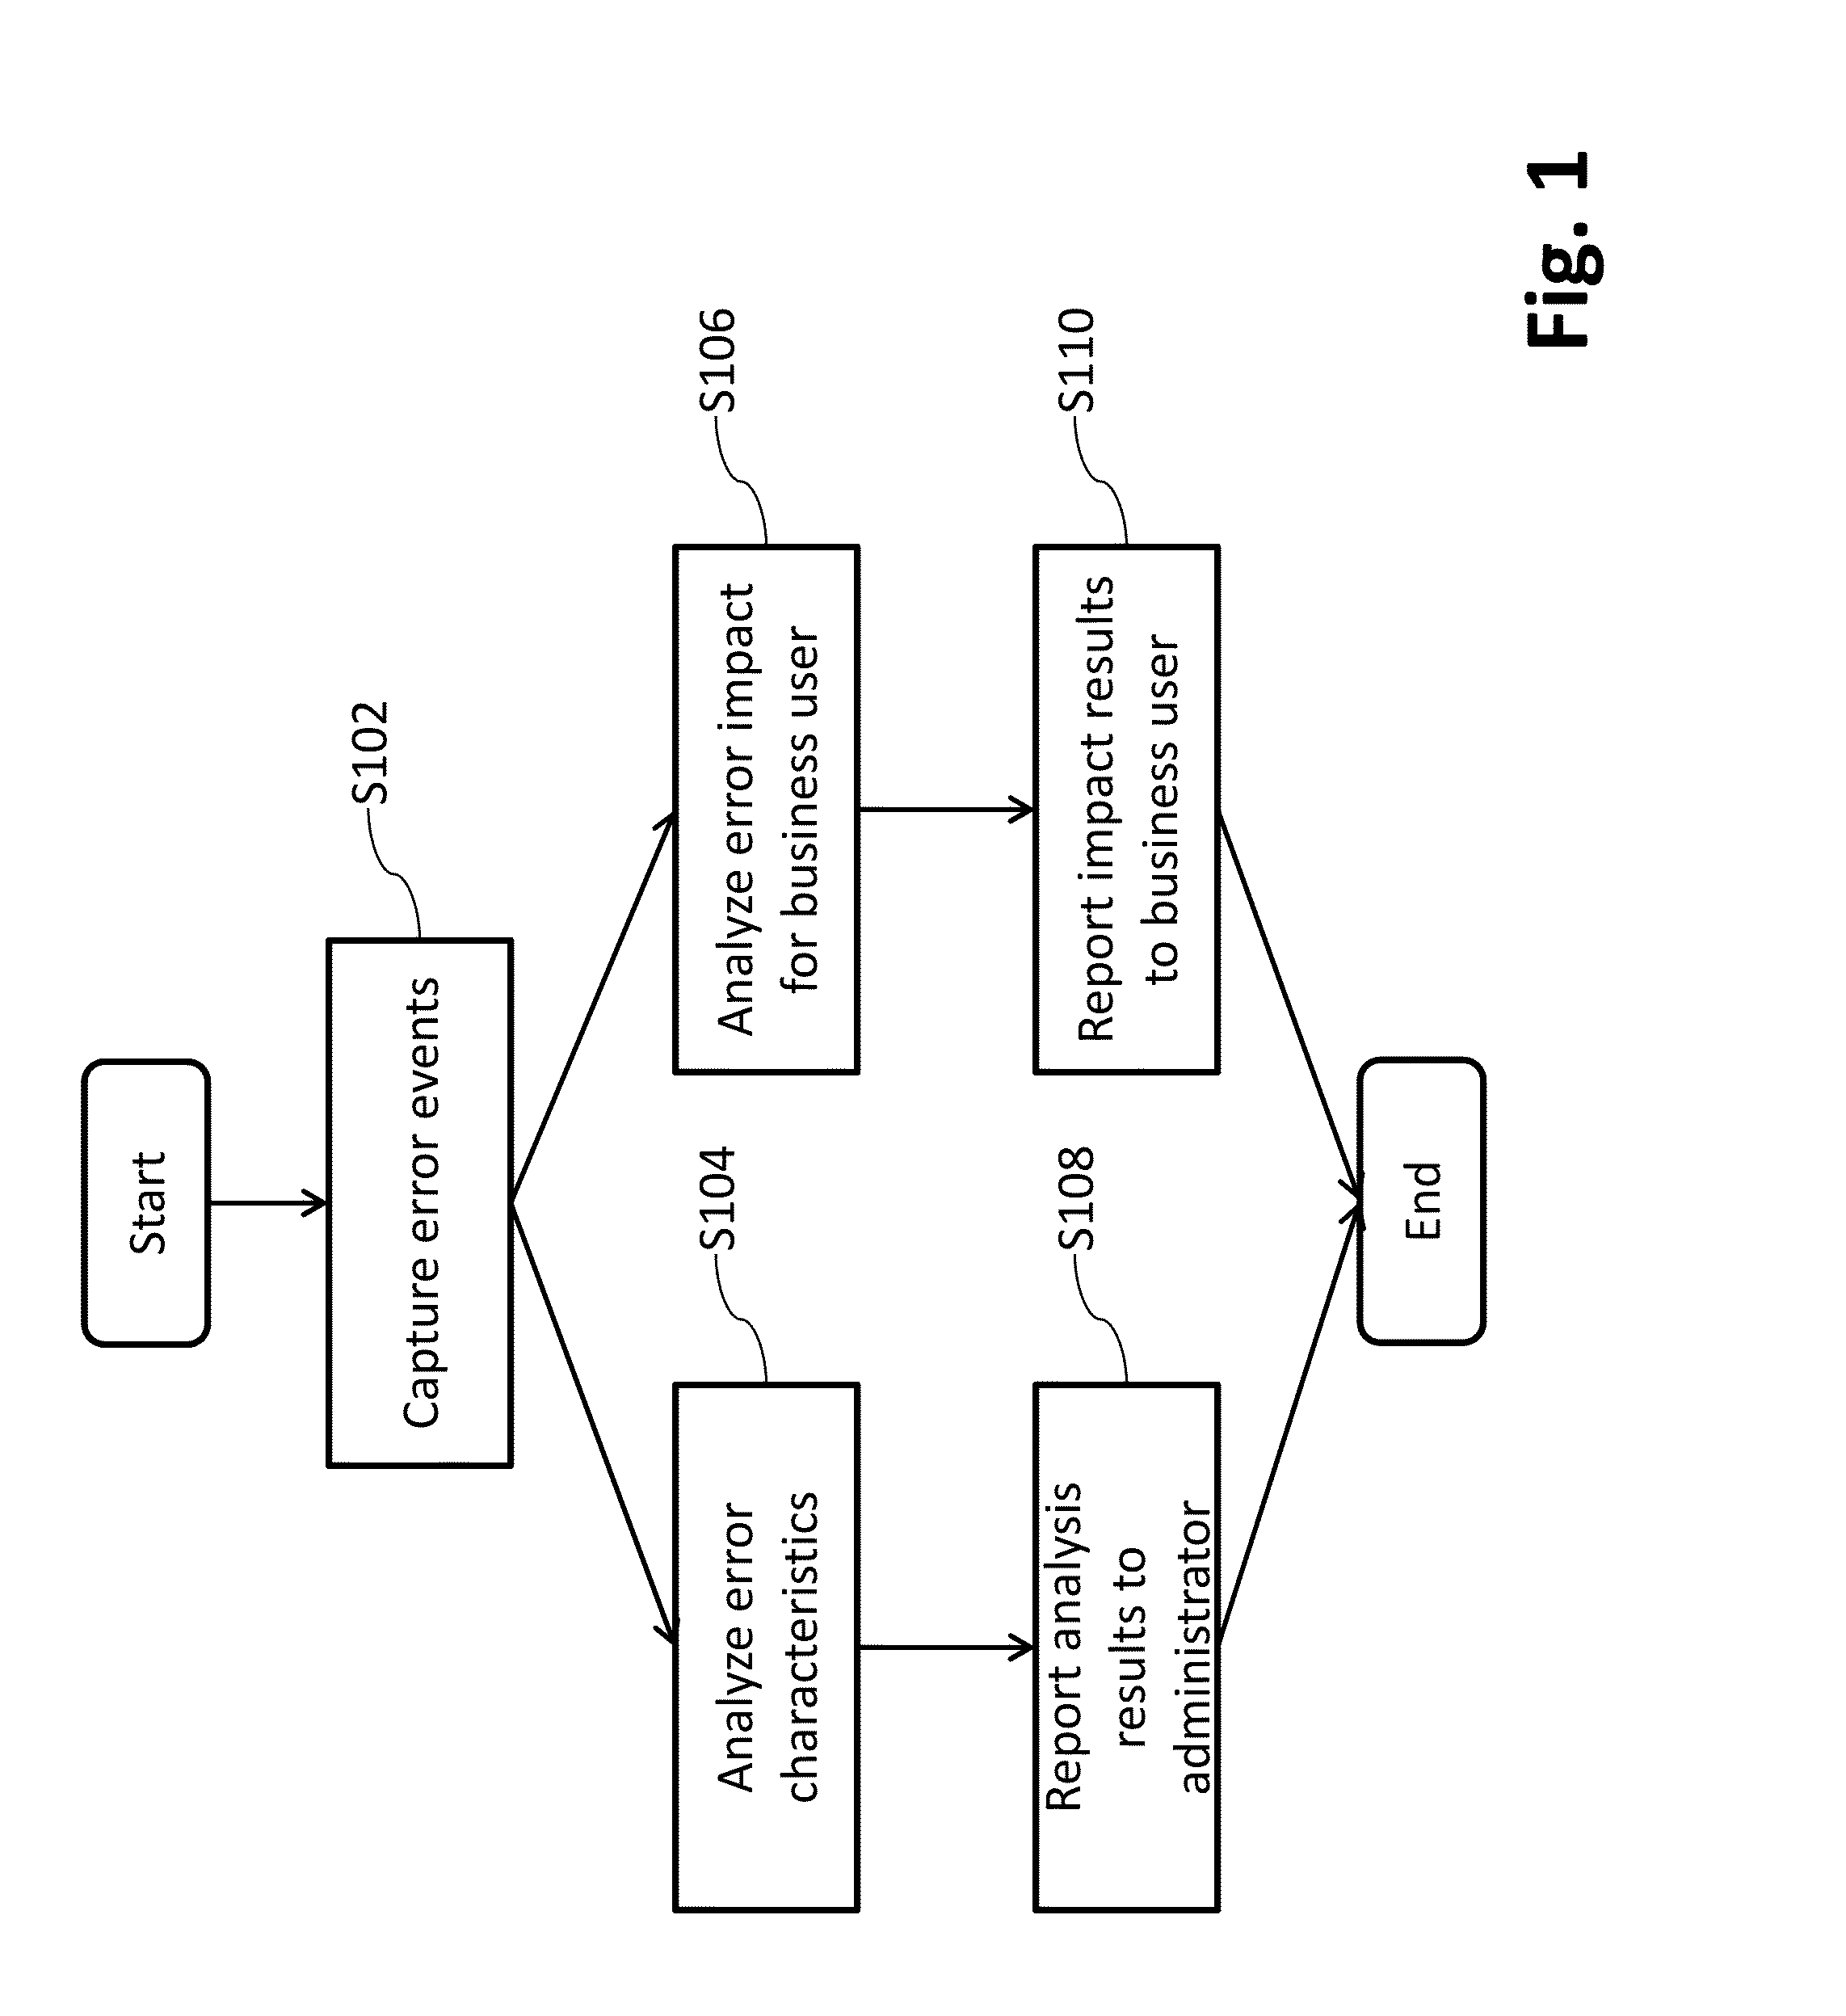 Systems and/or methods for handling erroneous events in complex event processing (CEP) applications